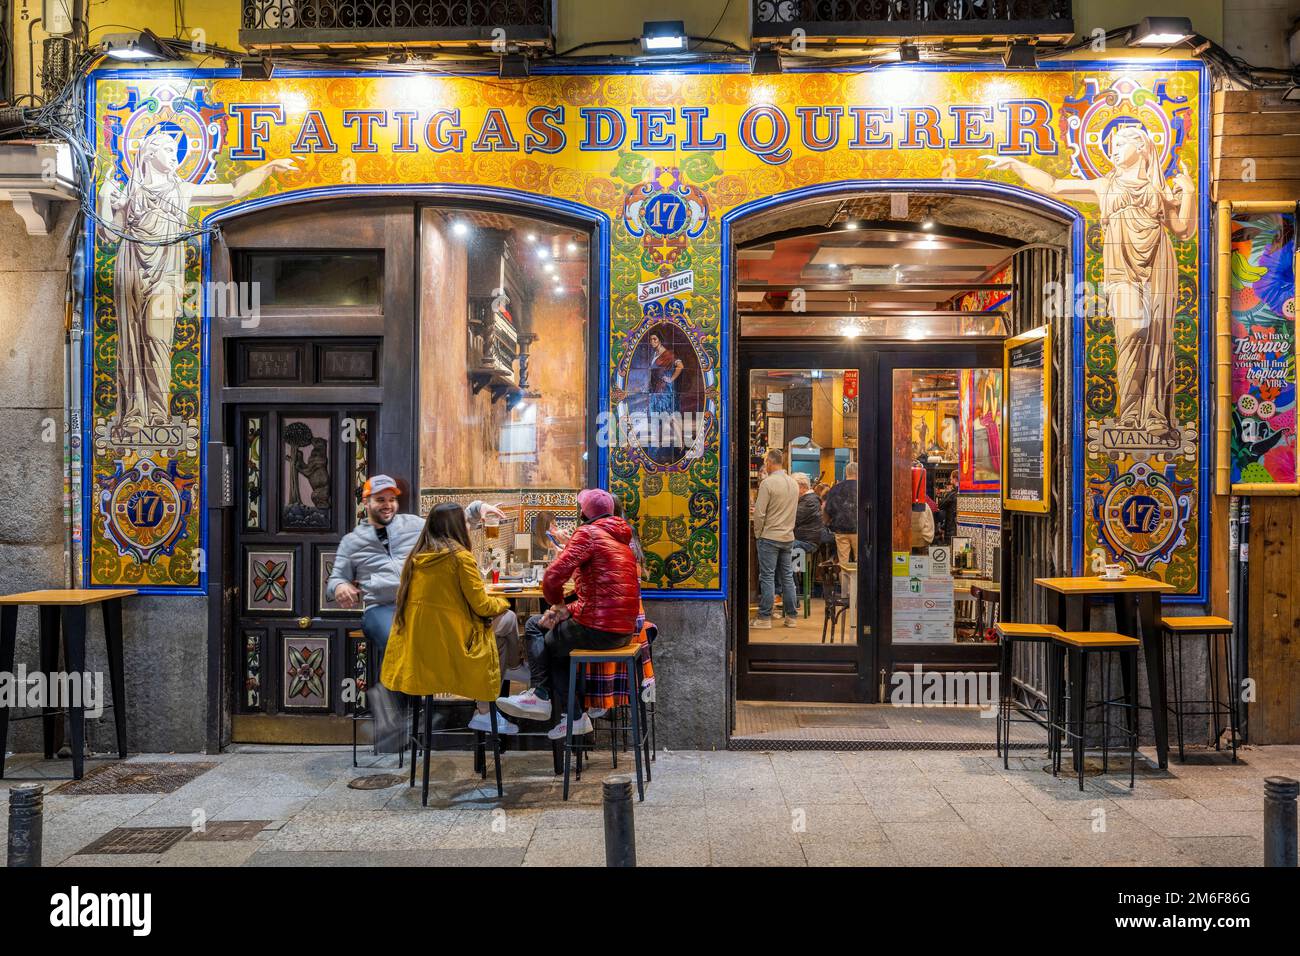 Scenic night view of a bar restaurant in the Barrio de Las Letras or Literary Quarter, Madrid, Spain Stock Photo